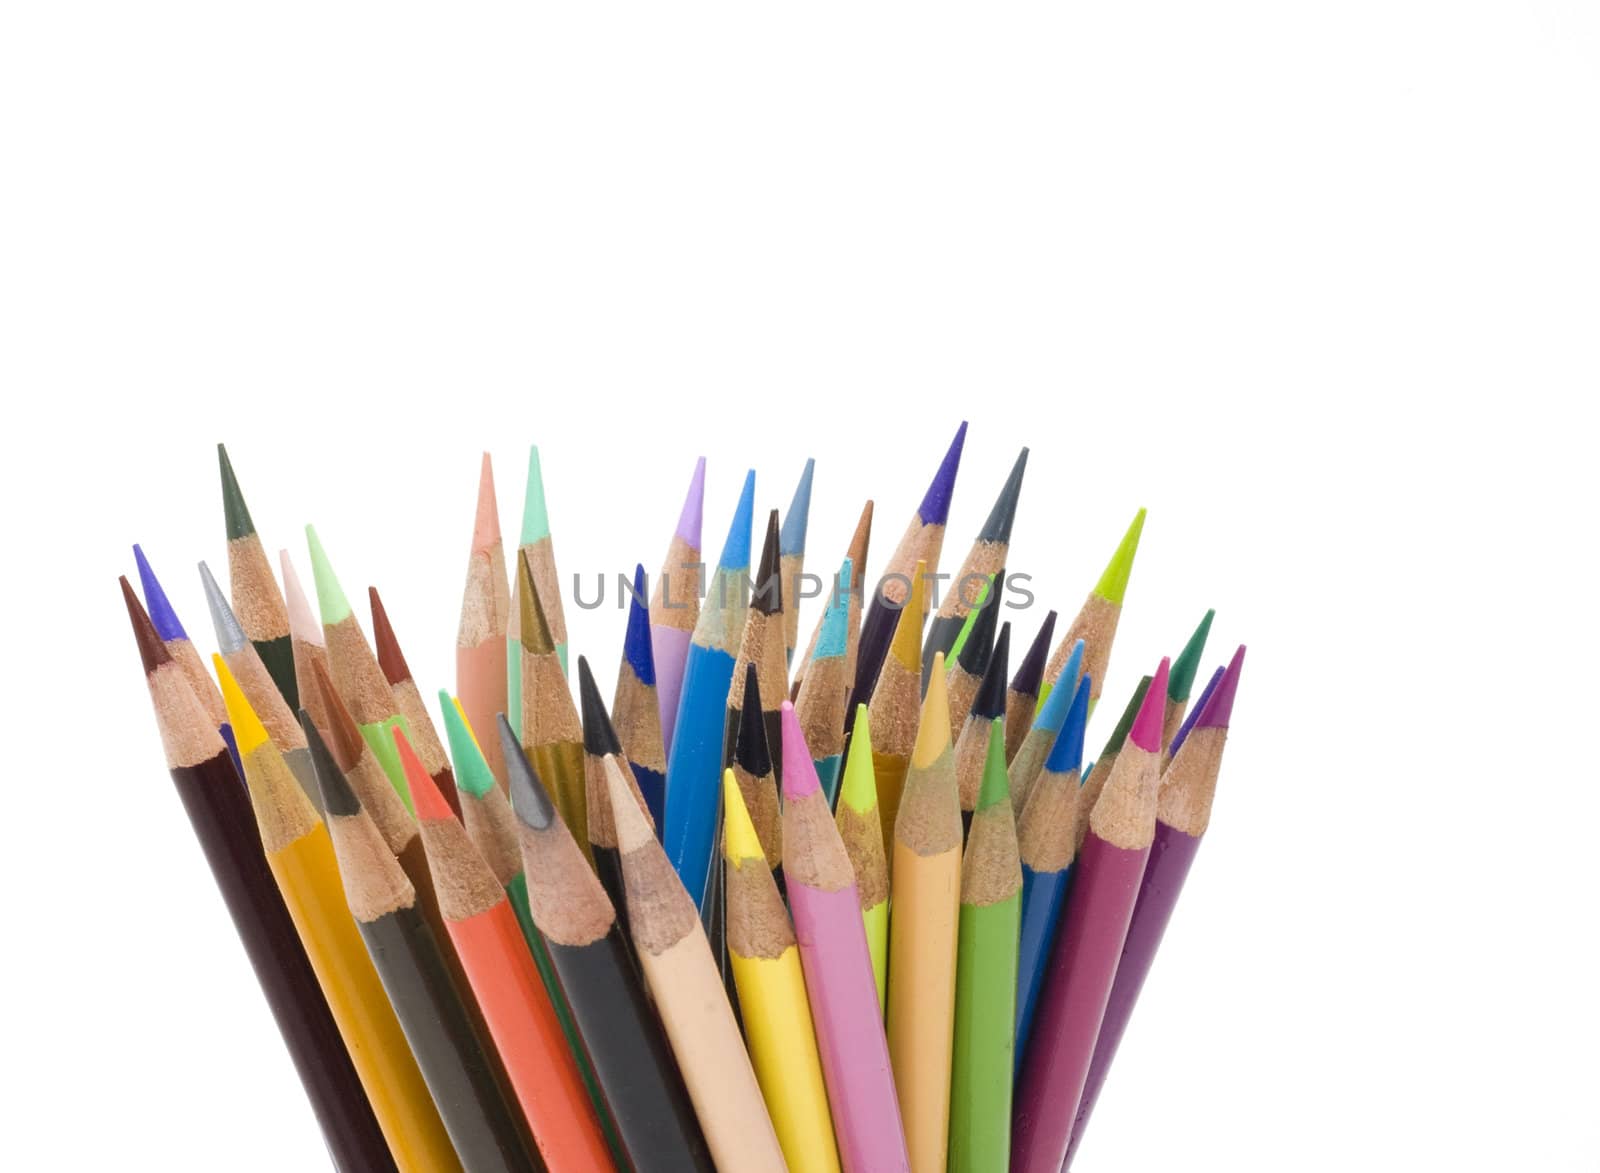 Multiple Colored Pencils by Gordo25